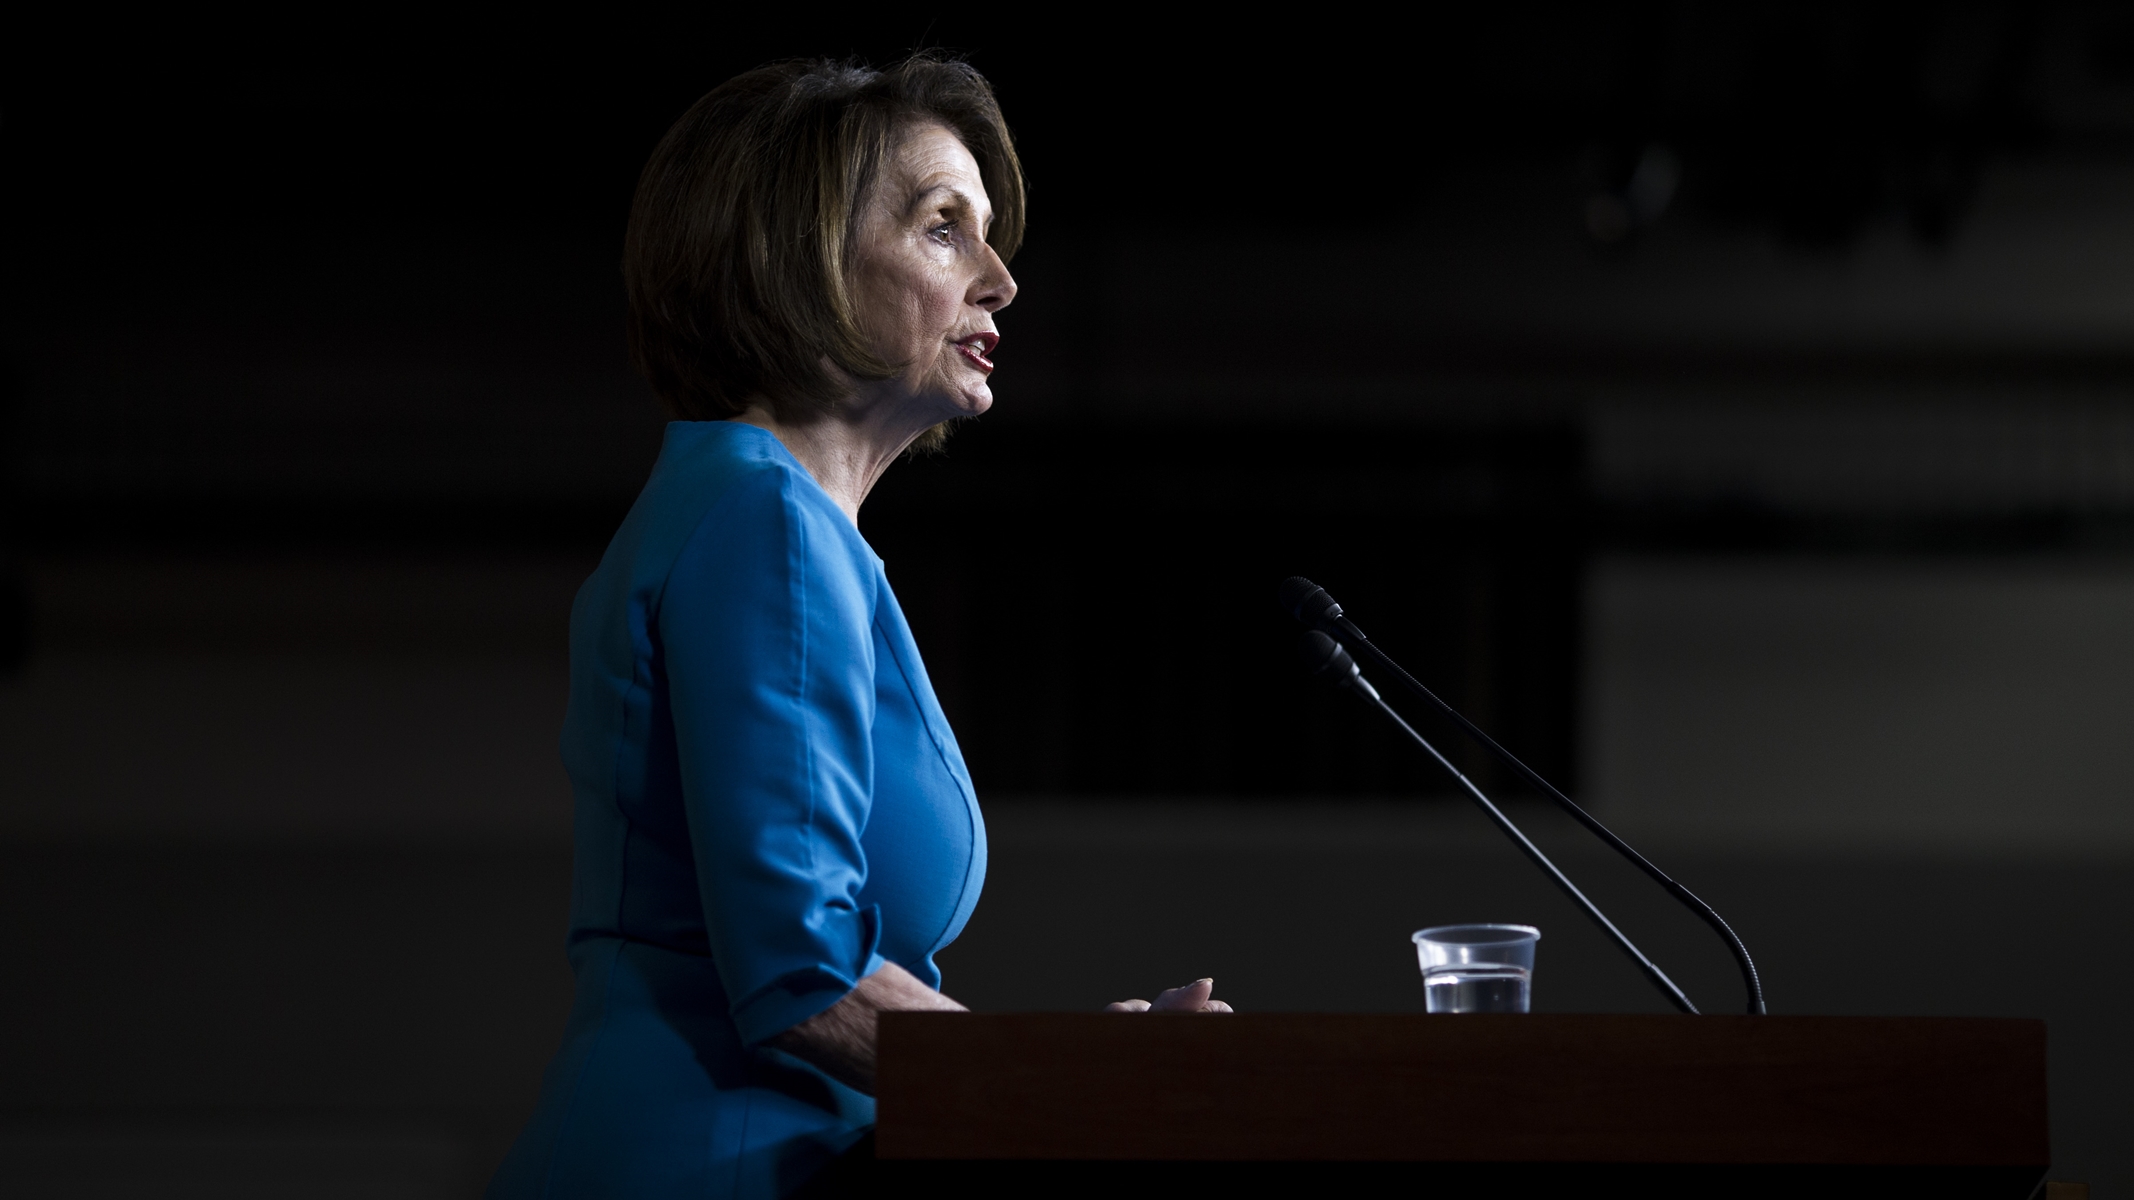 Pelosi: &#8220;This President...Engaged in a Cover Up, and That Could Be an Impeachable Offense&#8221;